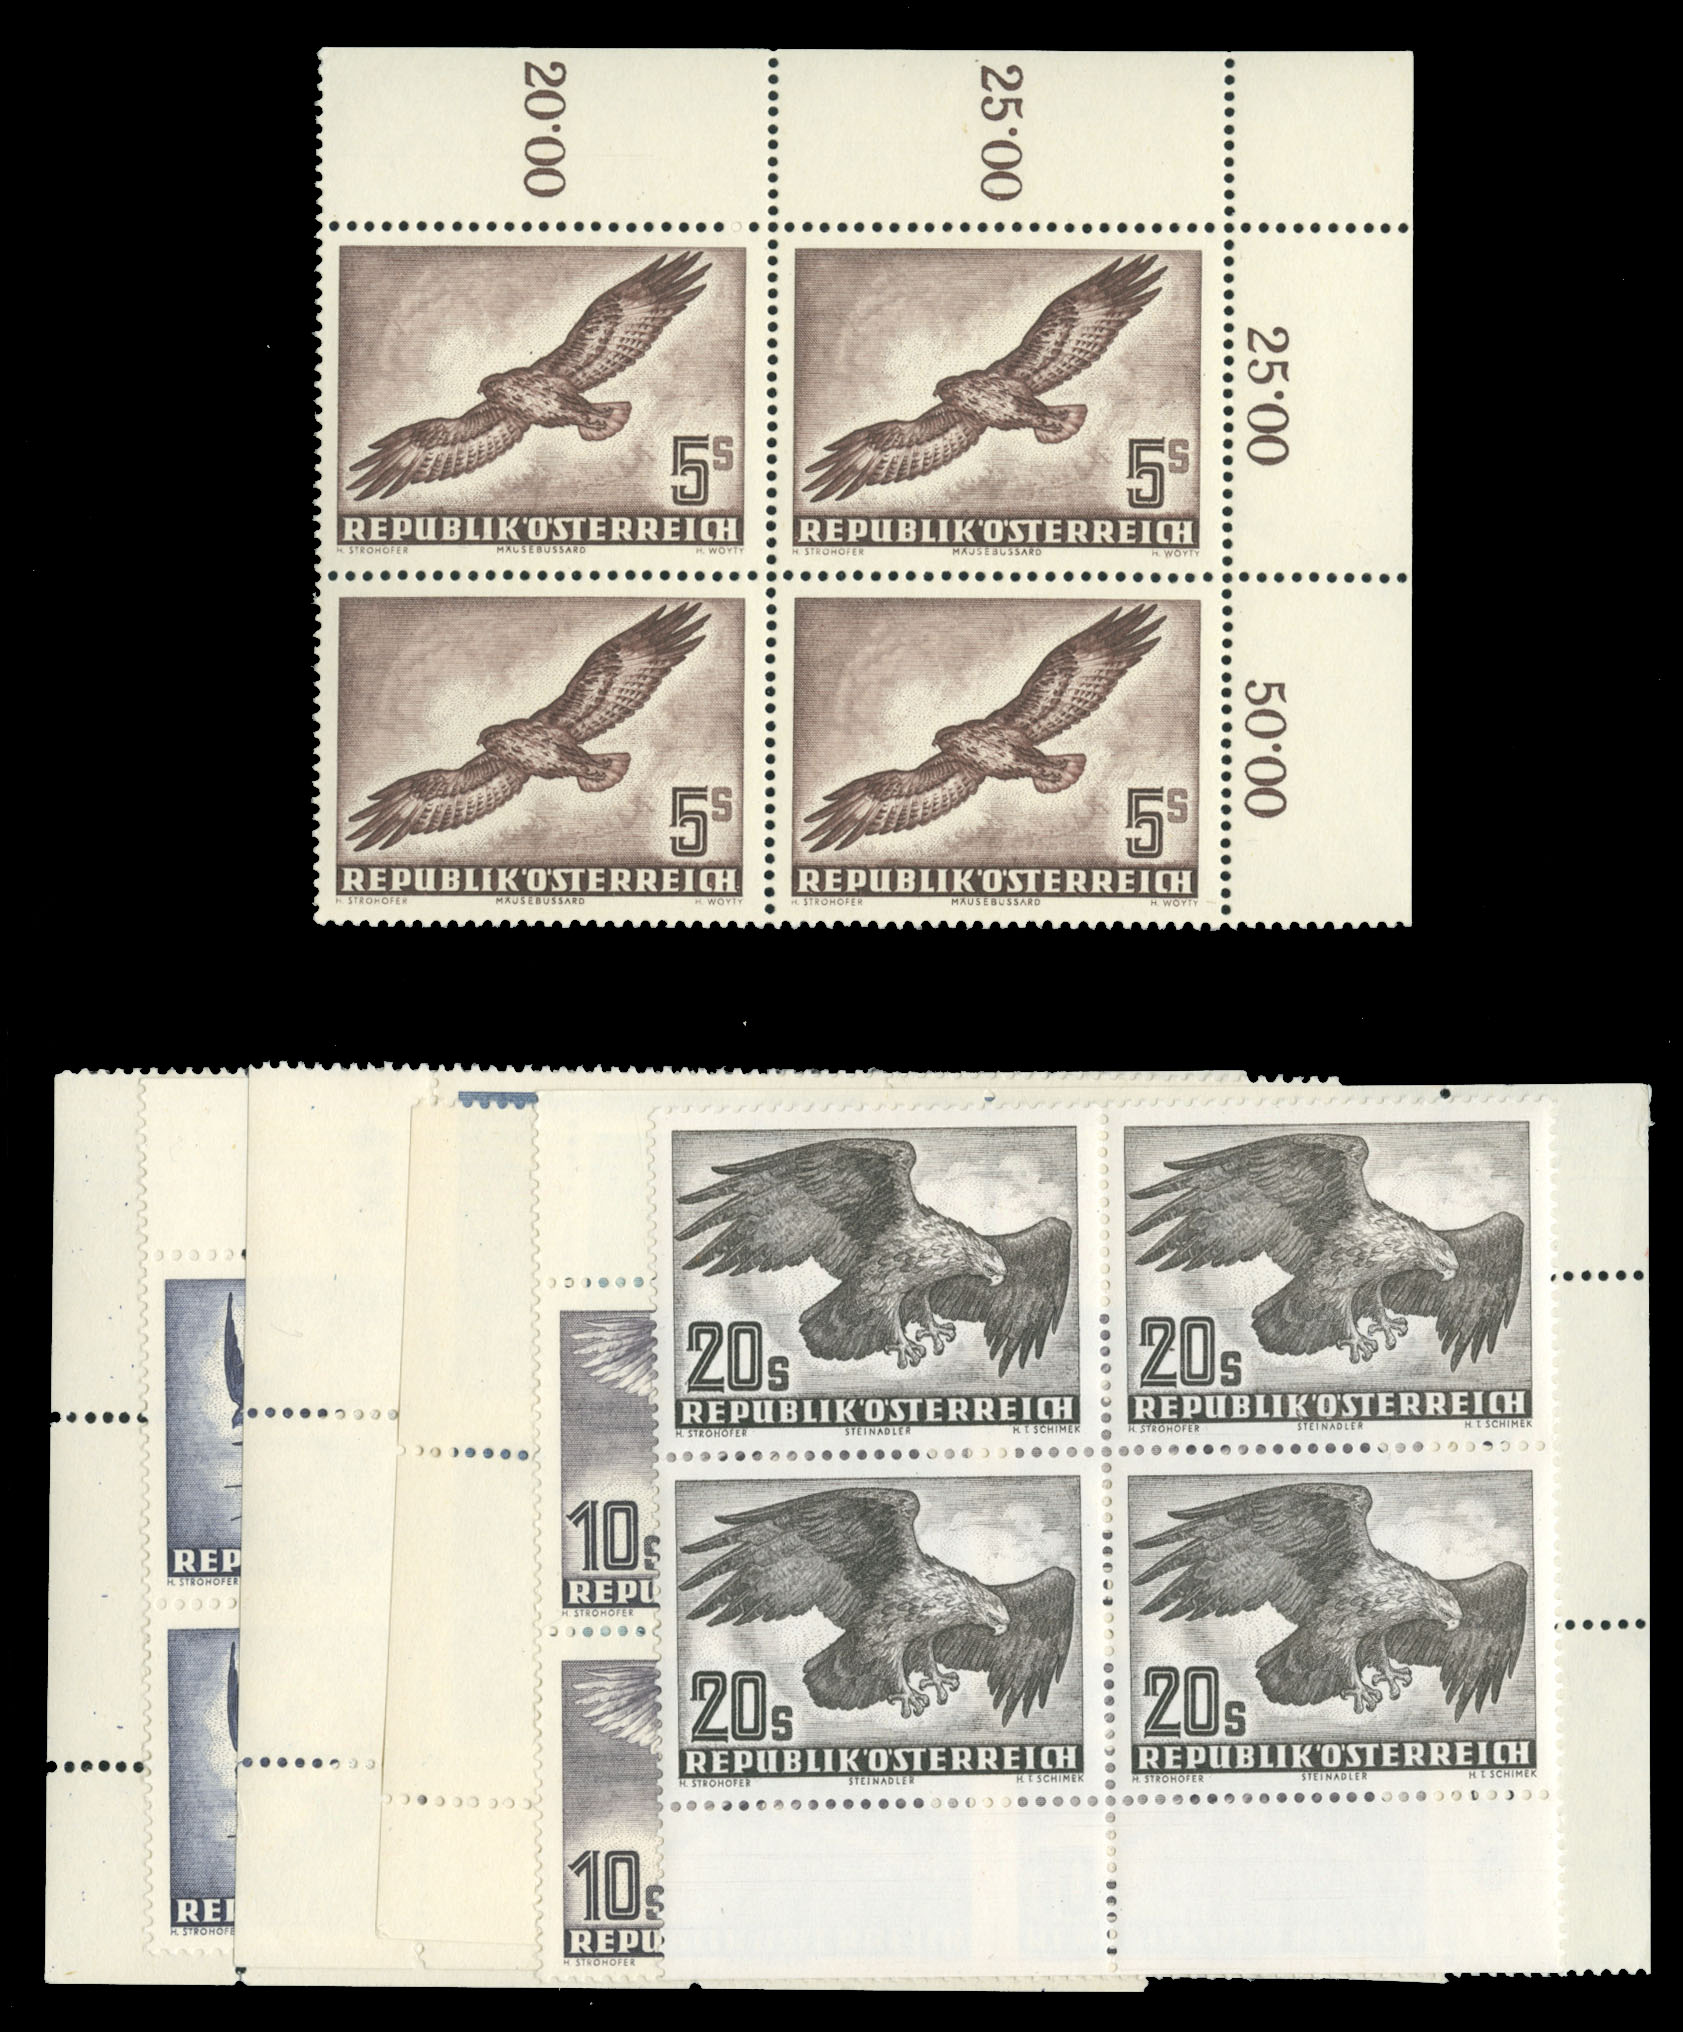 Lot 272 - AUSTRIA Austria - Post WWII Local Issues - Steyr  -  Cherrystone Auctions U.S. & Worldwide Stamps & Postal History